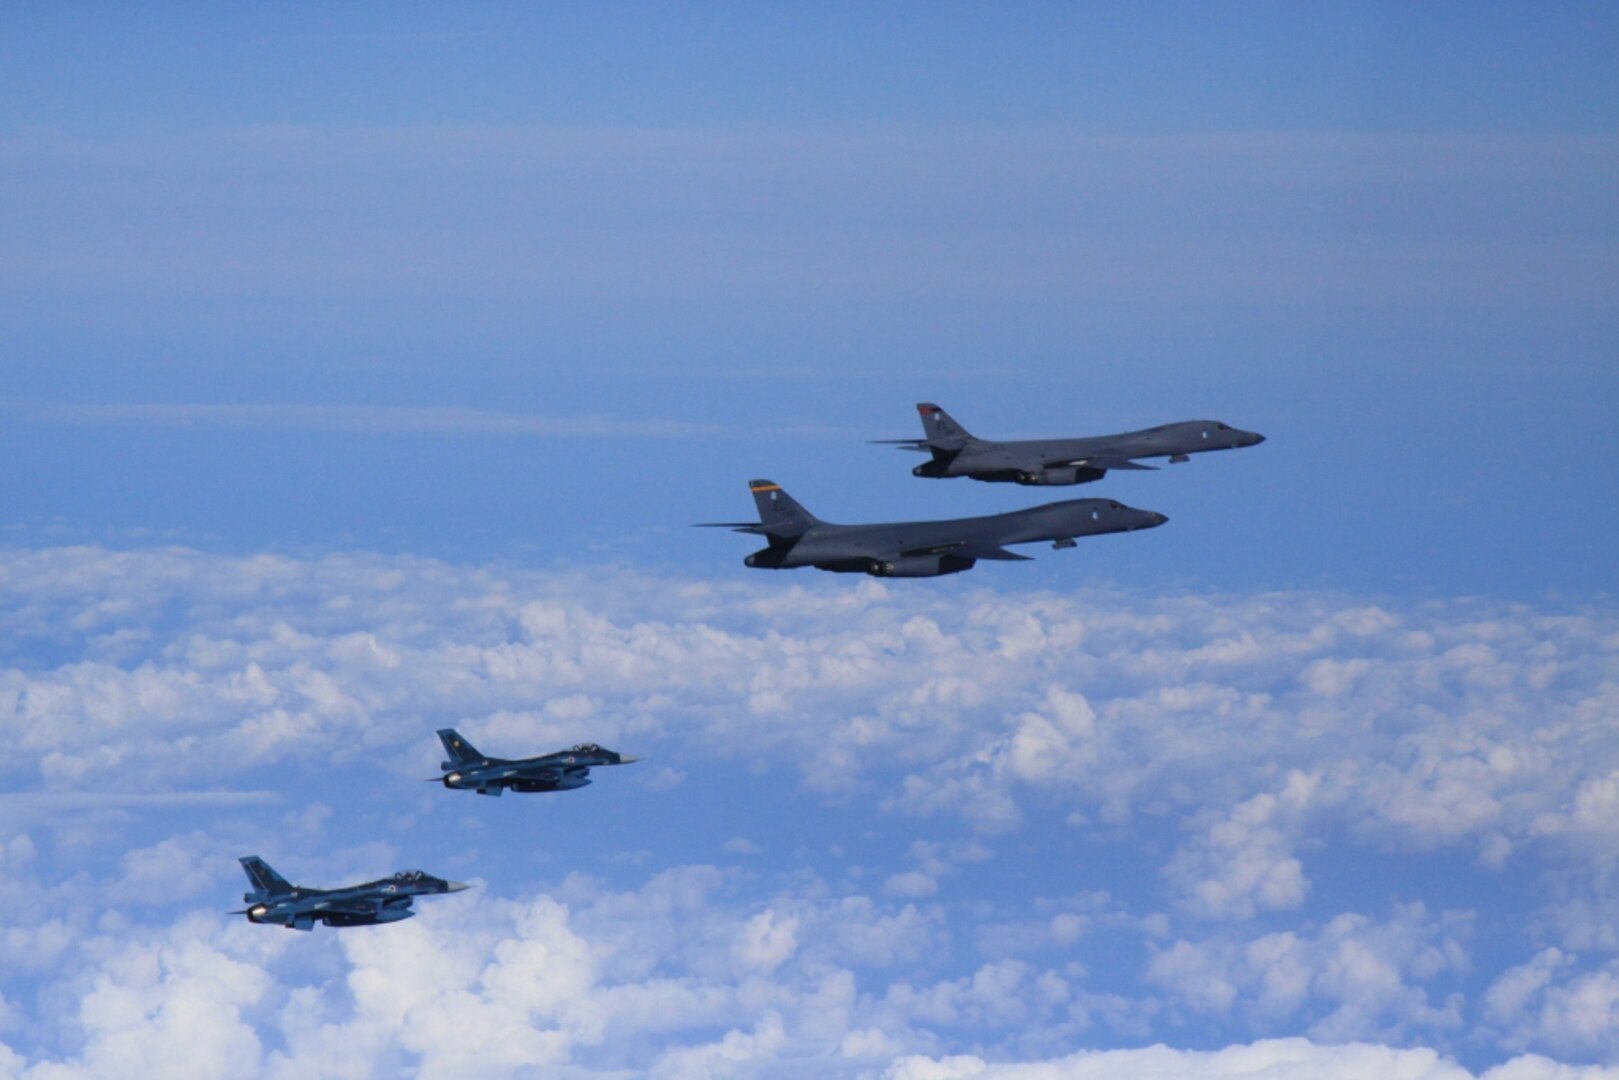 OSAN AIR BASE, Republic of Korea -- Today, two U.S. Air Force B-1B strategic bombers from Andersen Air Force Base, Guam, conducted training with fighter aircraft from the Japan Air Self Defense Force (JASDF) and a low-level flight with fighter aircraft from the Republic of Korea (ROK) and the United States, in response to the recent nuclear test by North Korea.  (Courtesy Photo by U.S. Forces Korea/Released)